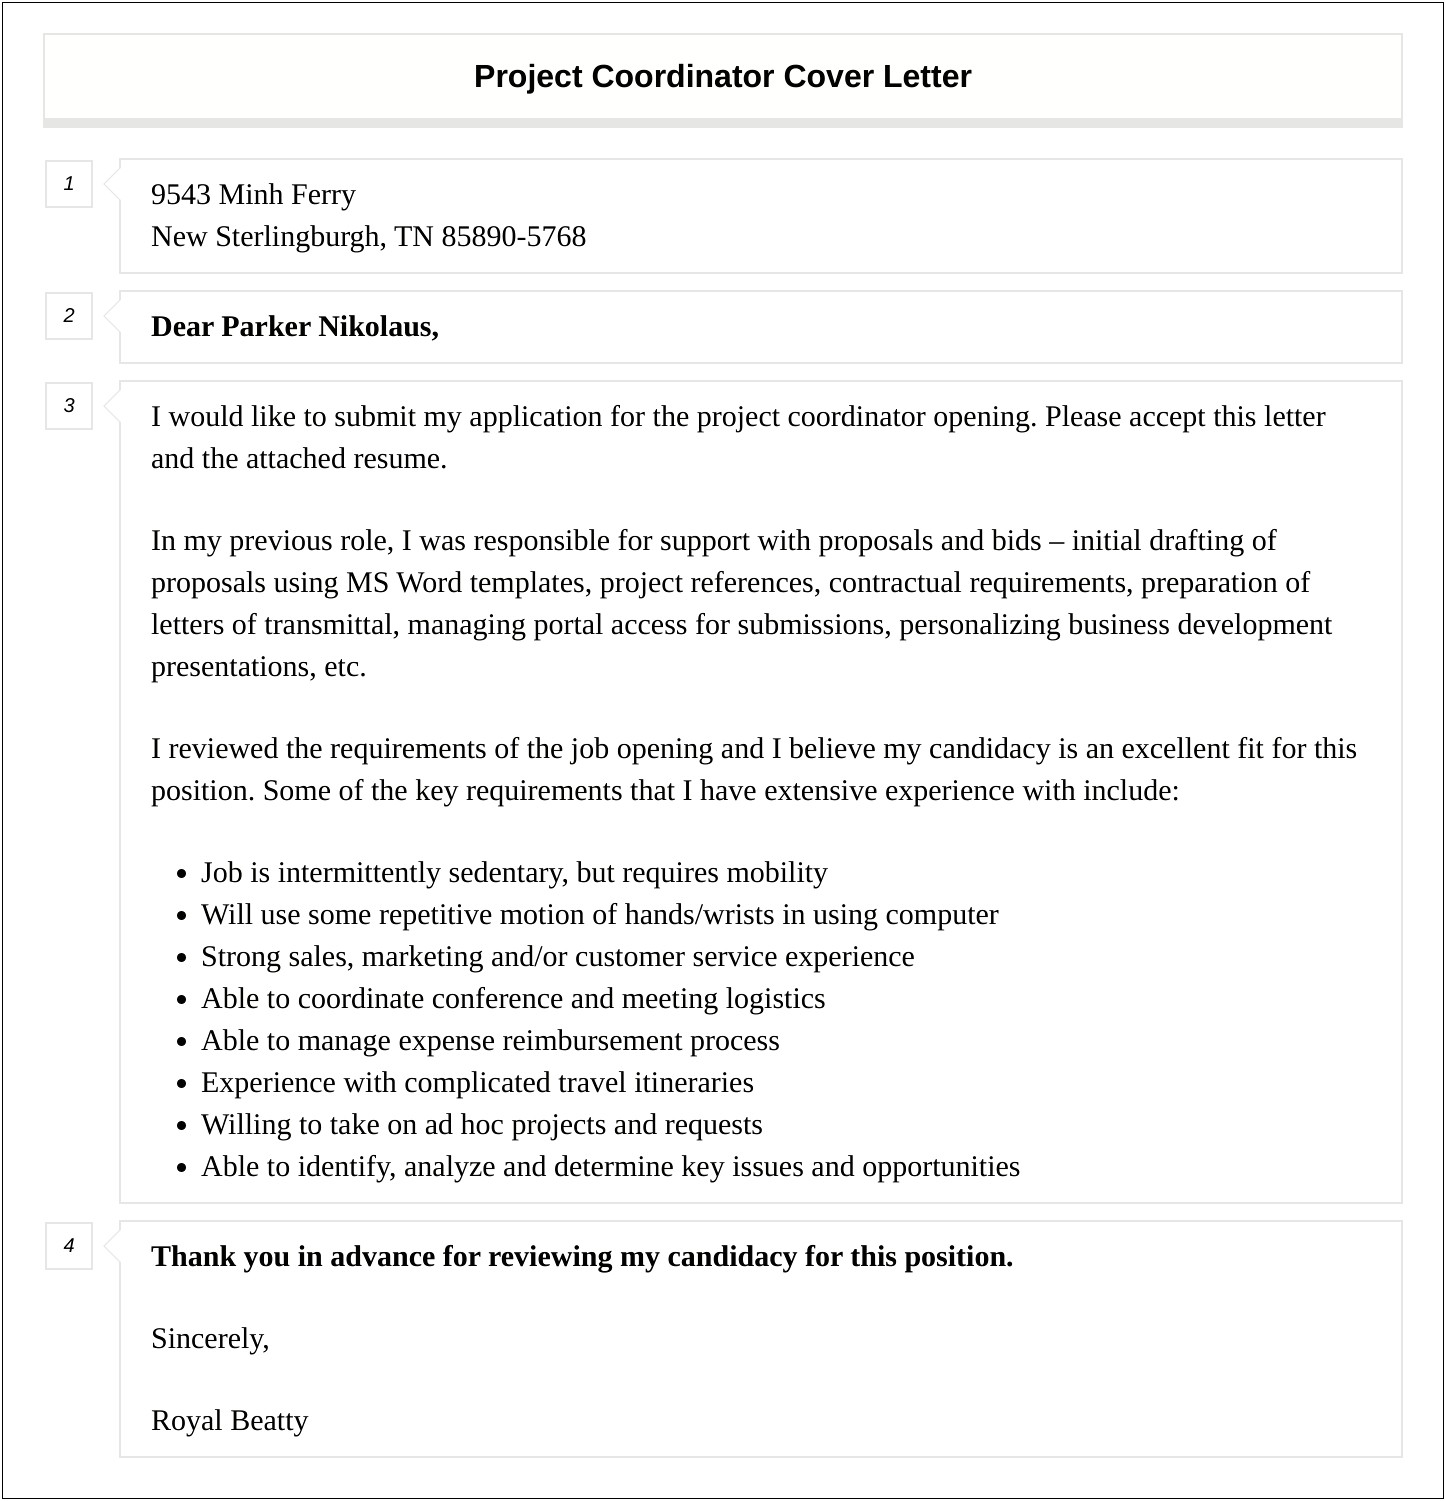 Rws 290 Cover Letter And Resume Project